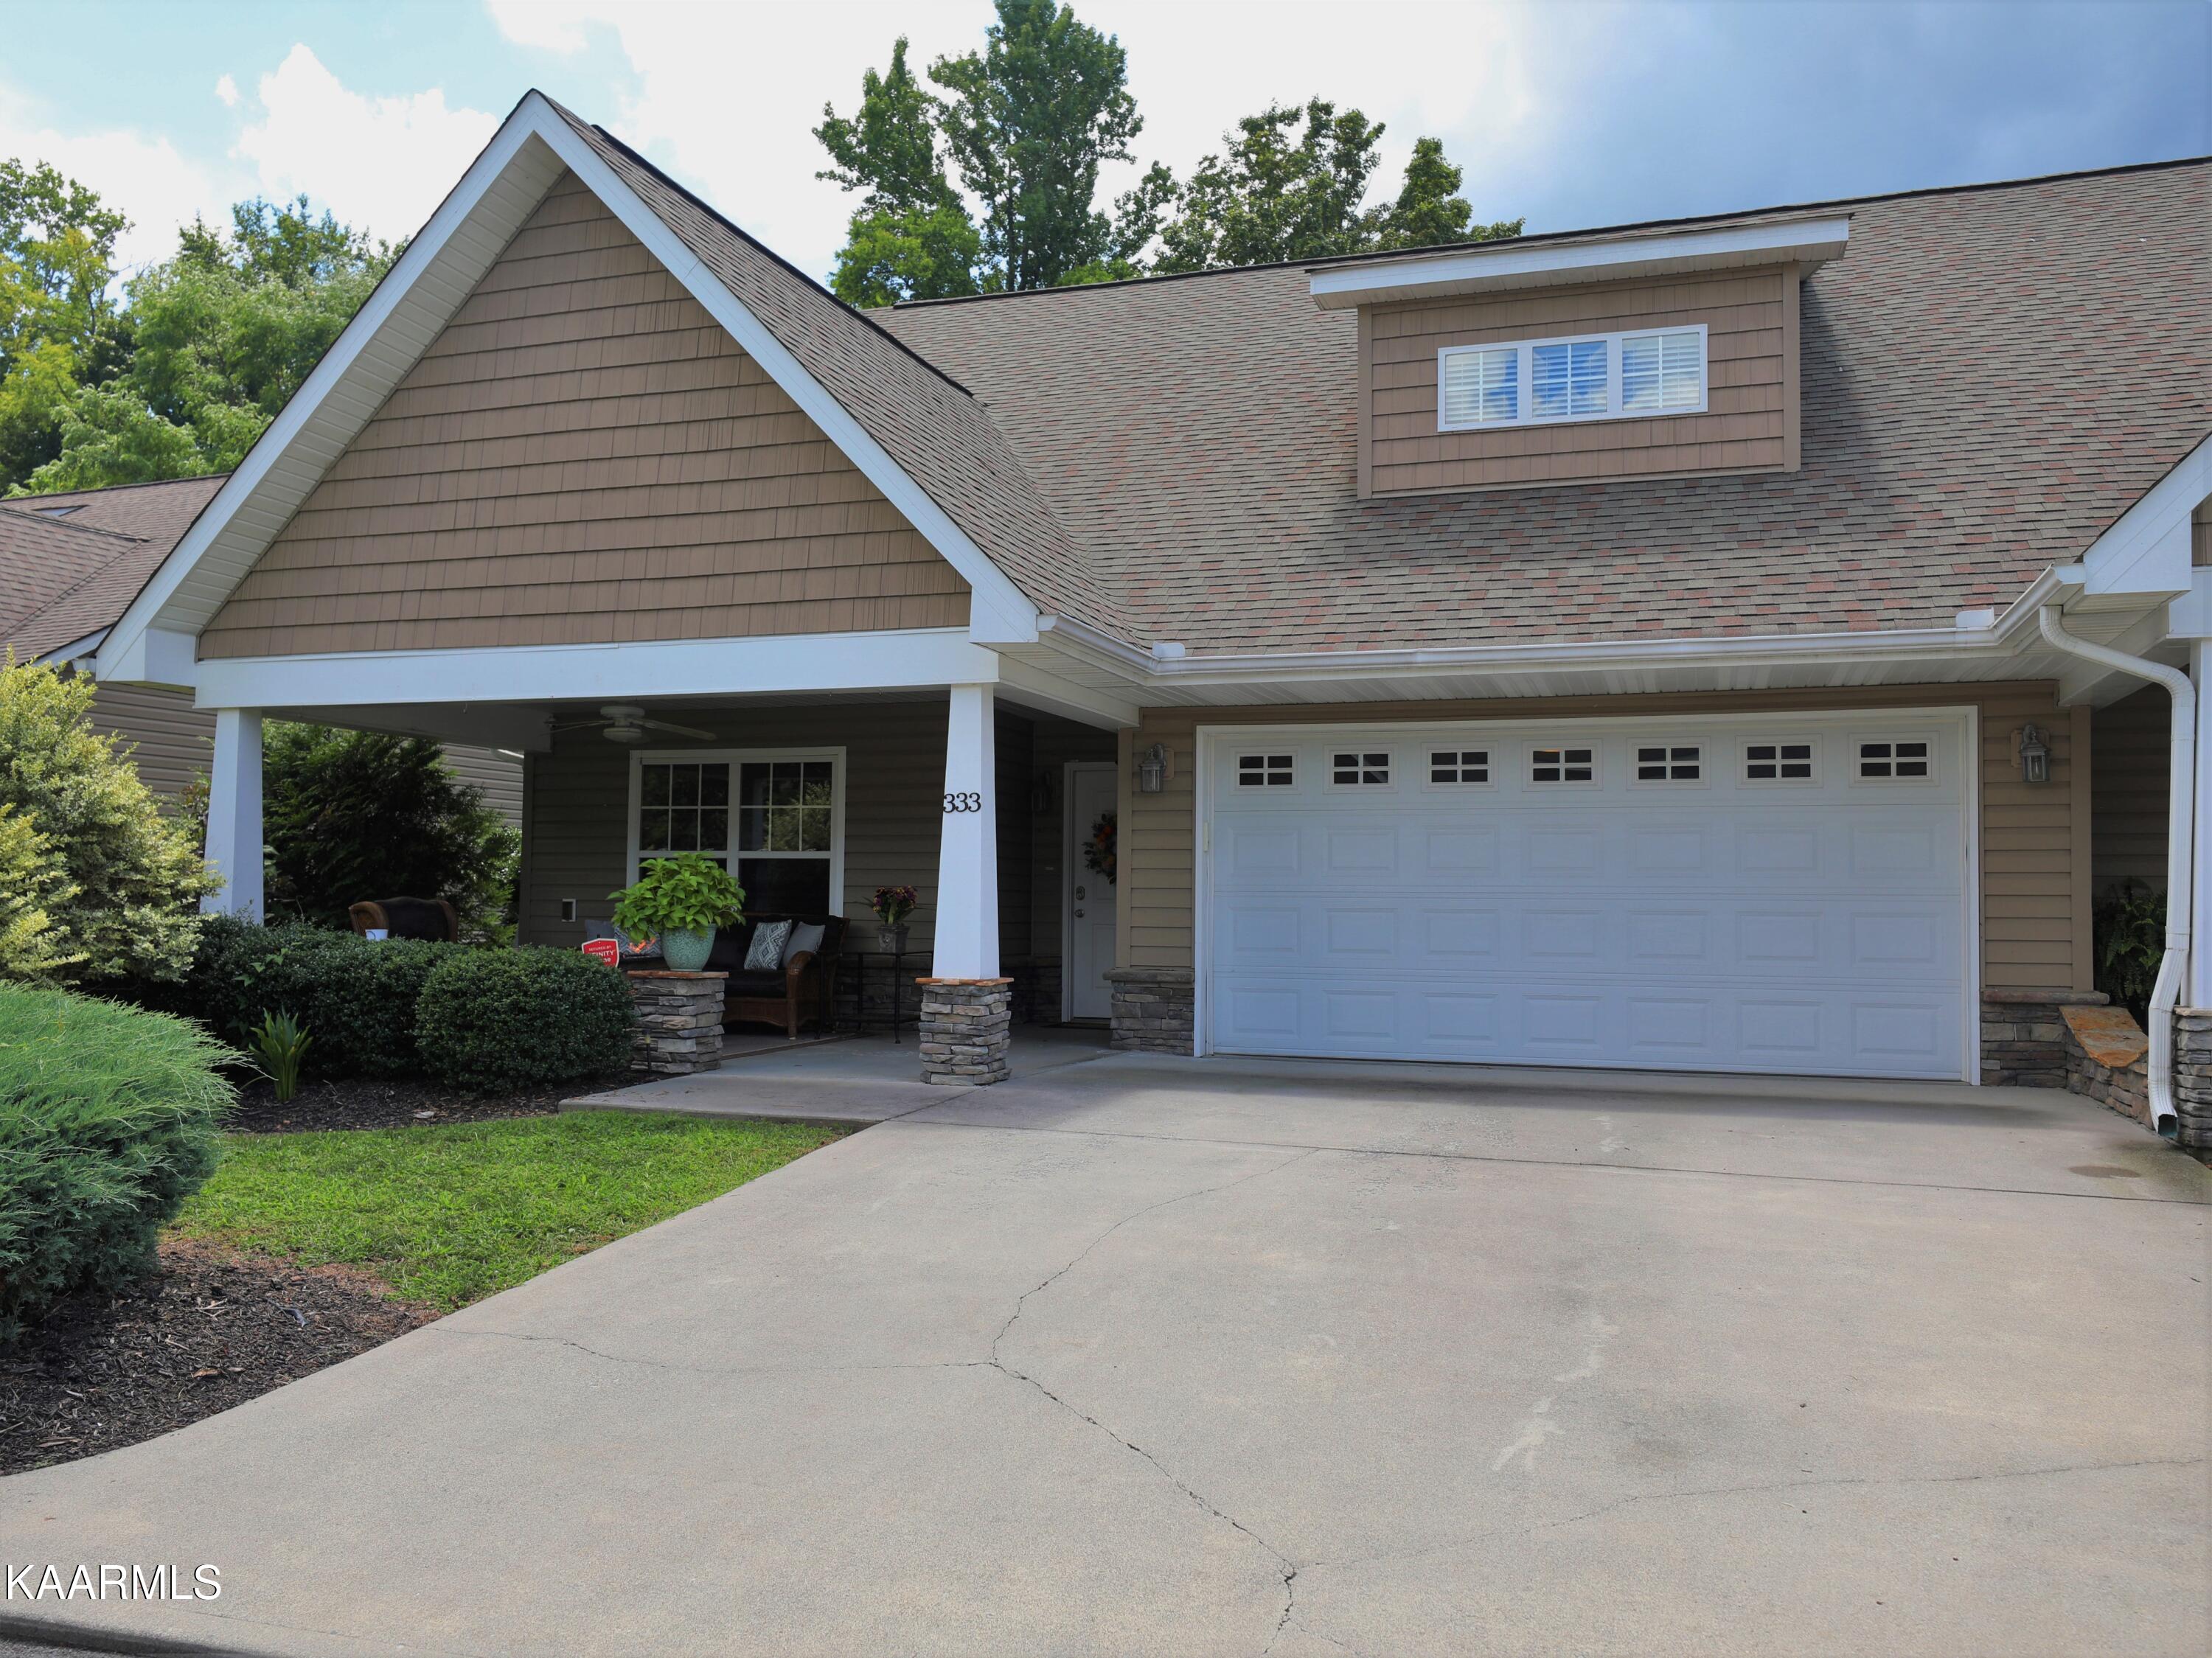 333 Meriwether Way, Unit 31, Pigeon Forge, TN 37863 | Compass